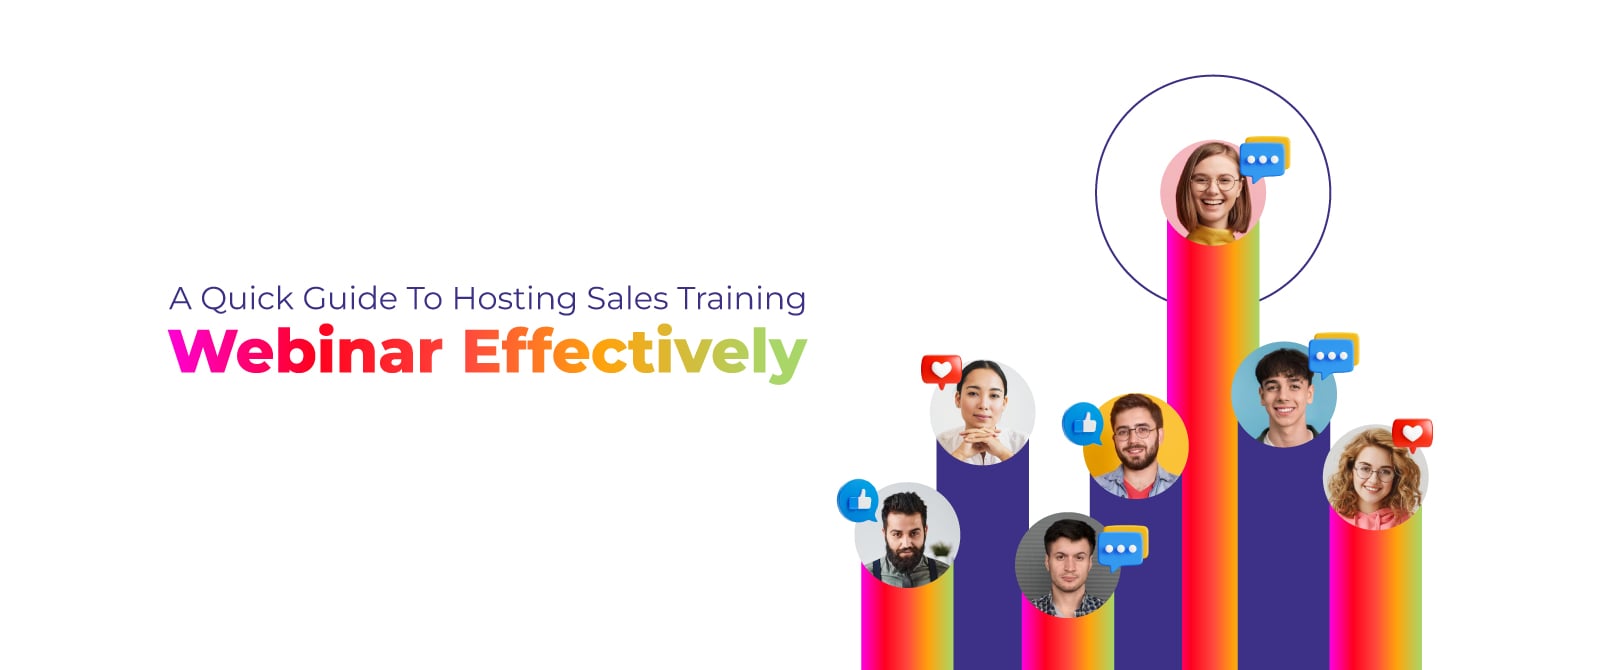 A Quick Guide To Hosting Sales Training Webinar Effectively